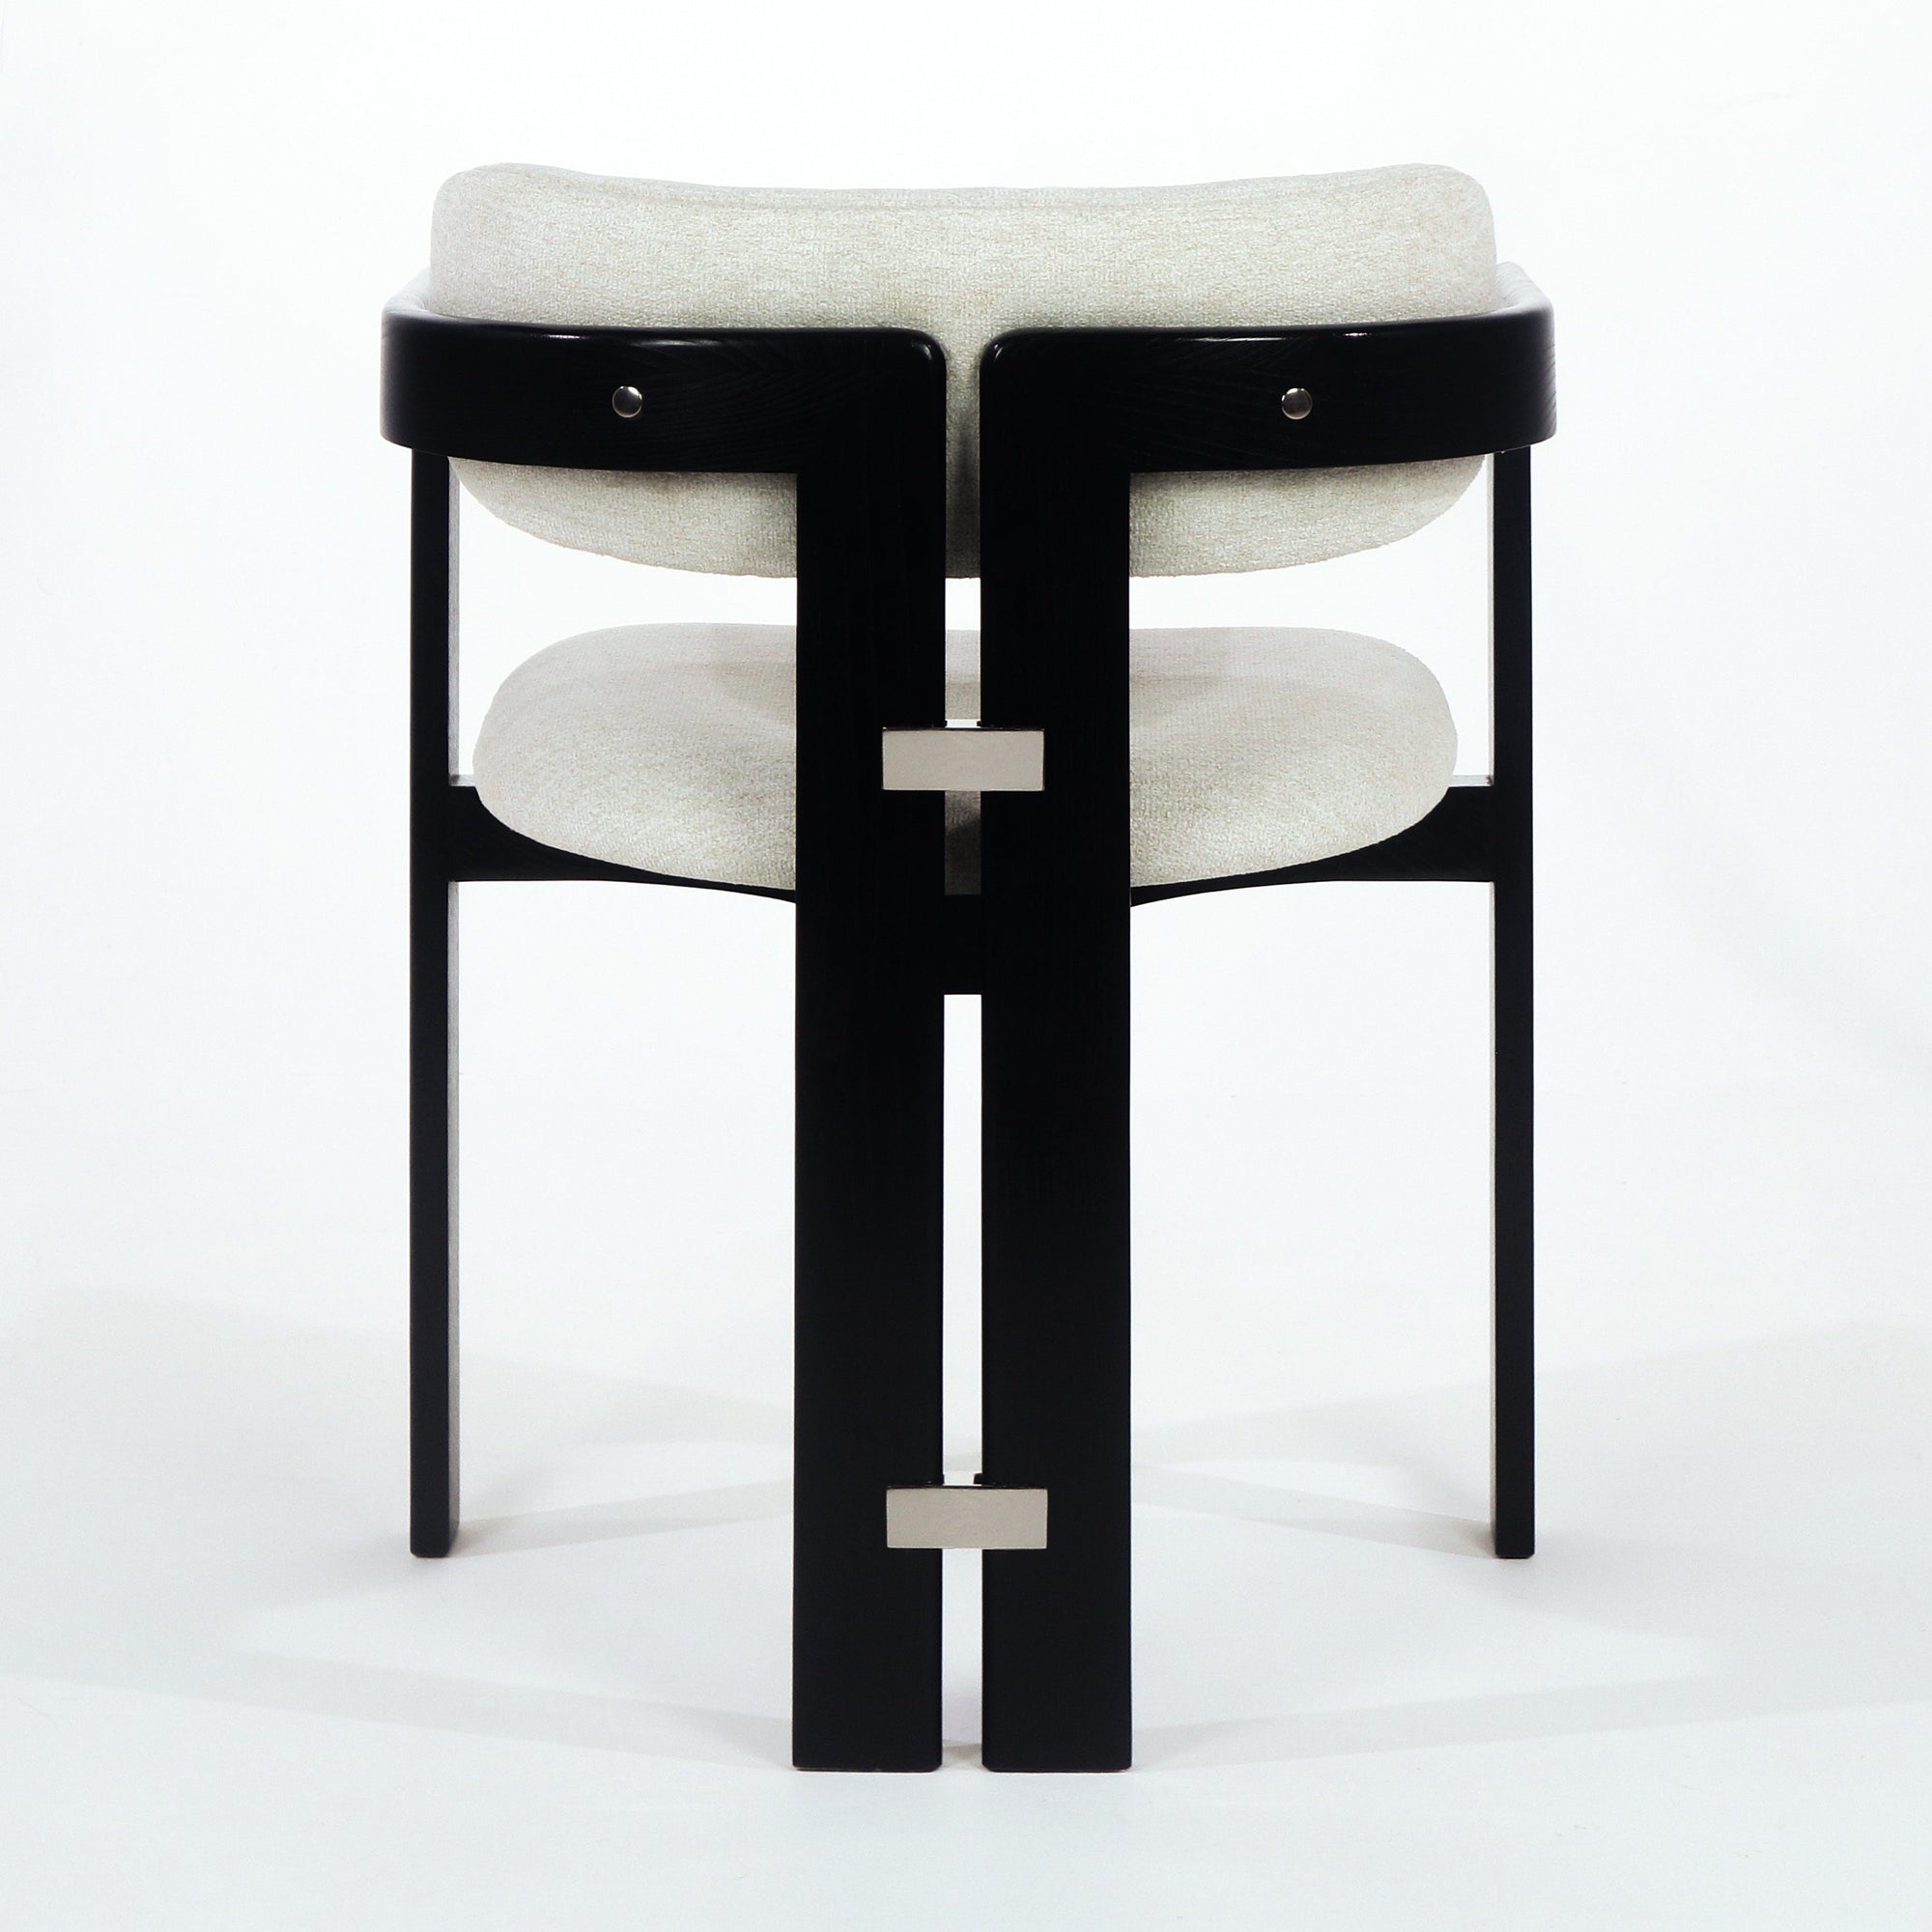 Black Pamplona Dining Chair with Beige Boucle and Stainless Steel Accents - INTERIORTONIC